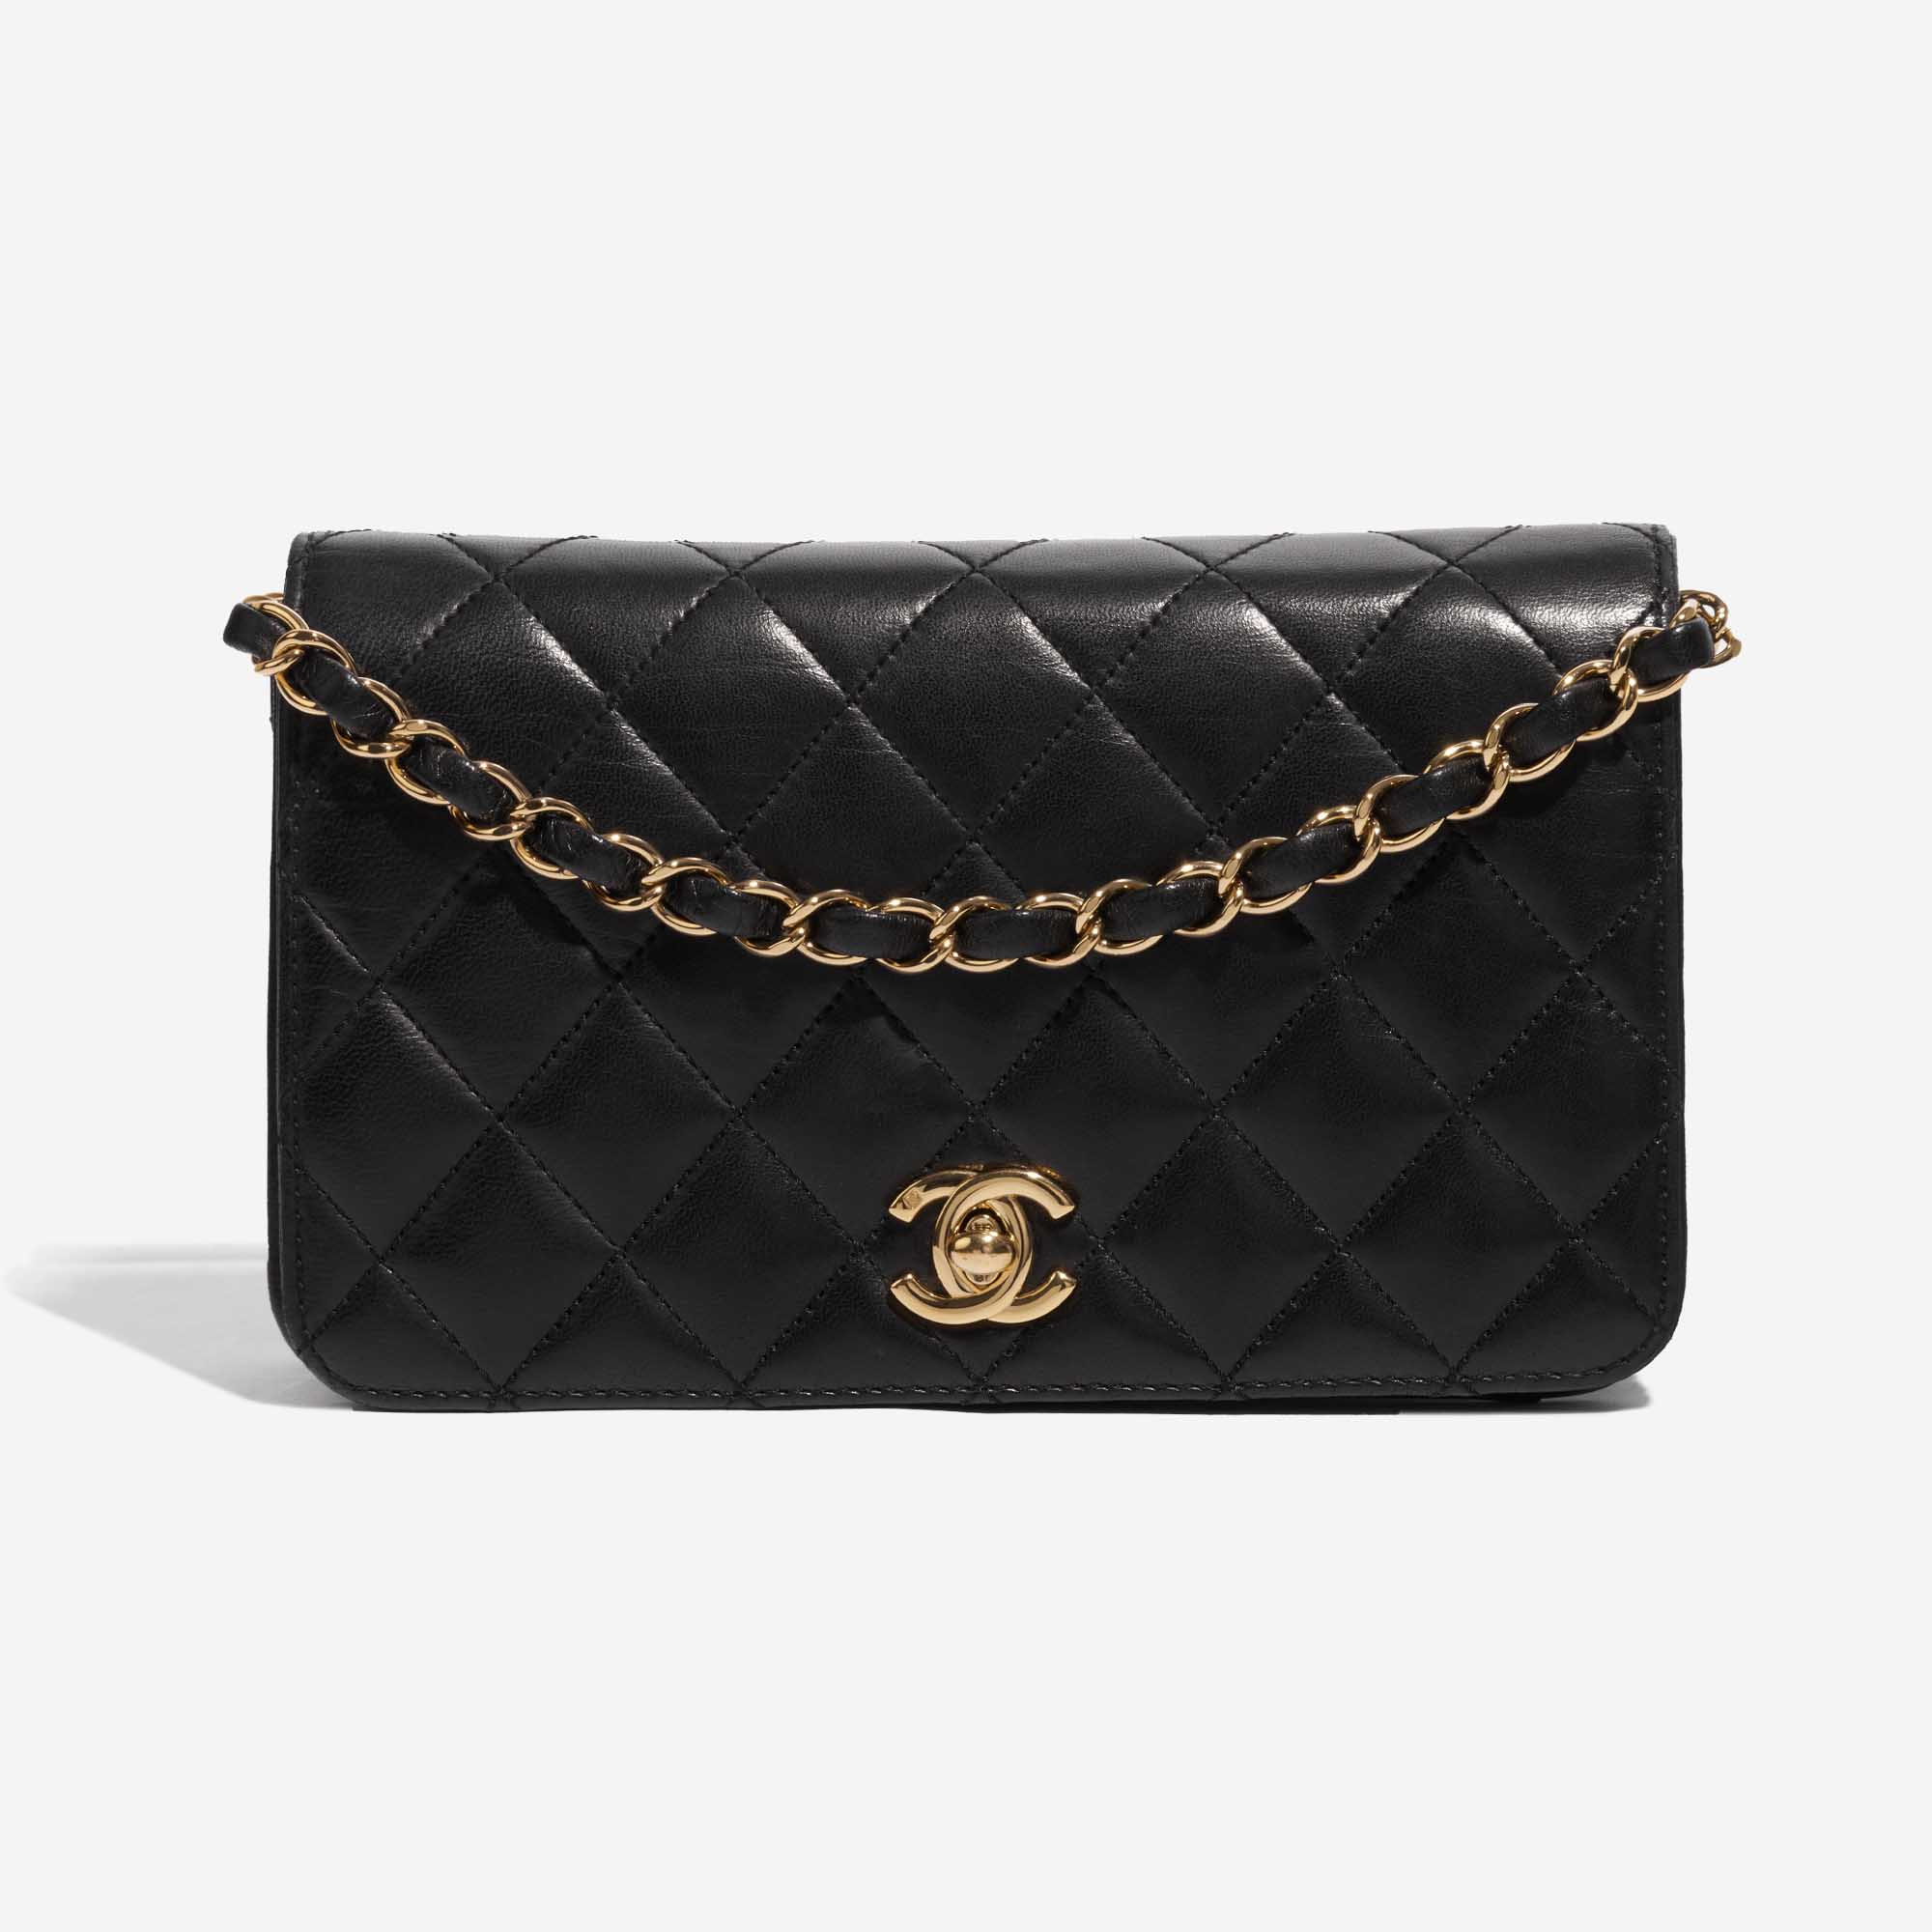 Chanel Pre Owned 2005-2006 CC diamond-quilted shoulder bag - ShopStyle